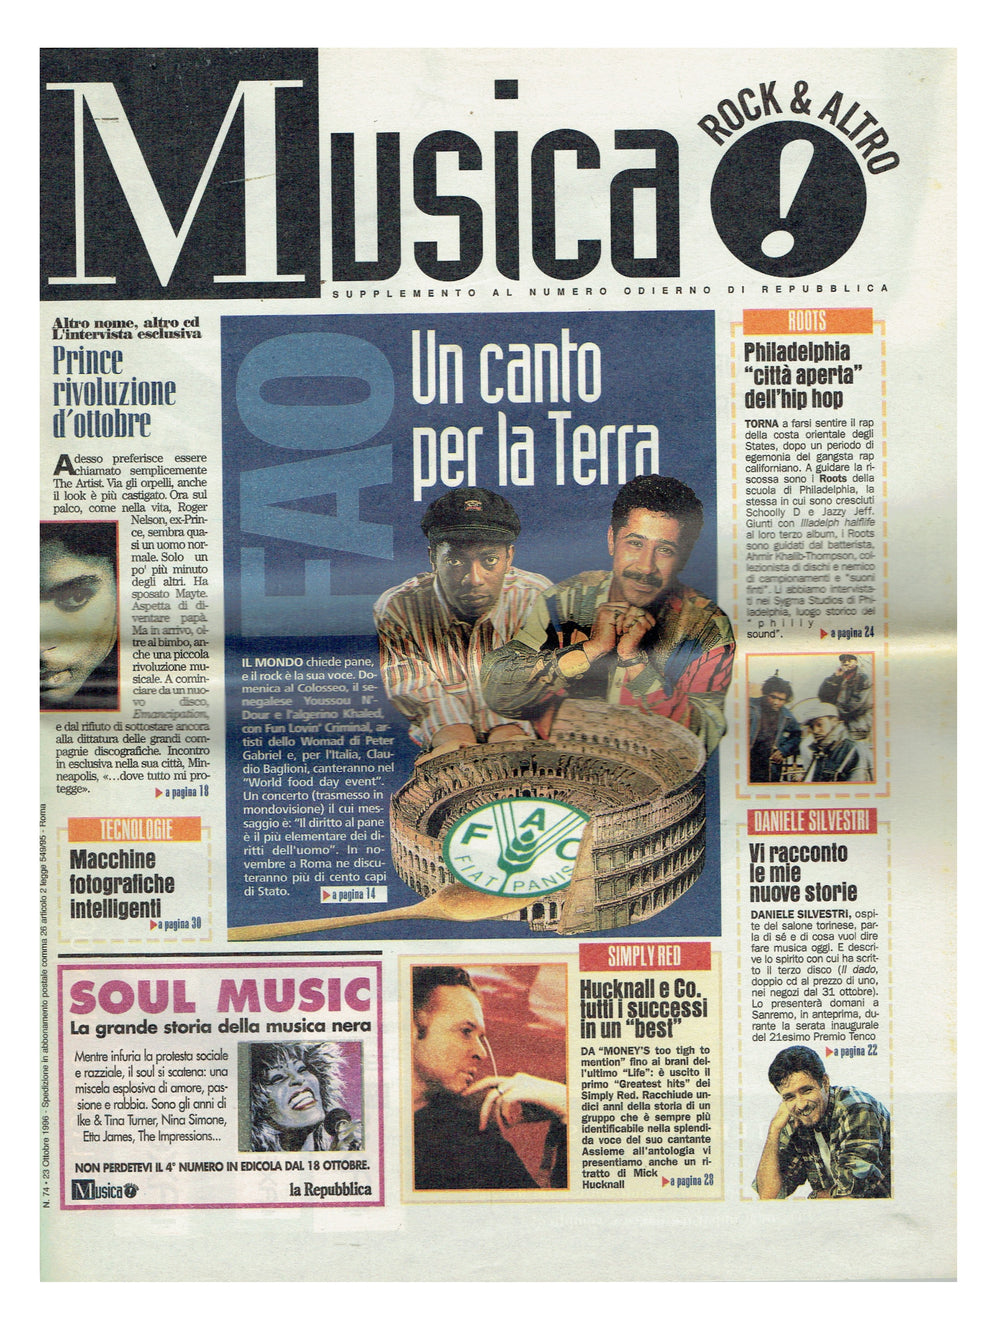 Prince – Musica Magazine October 23rdInsert Cover & 2 Page Article Italian Preloved: 1996